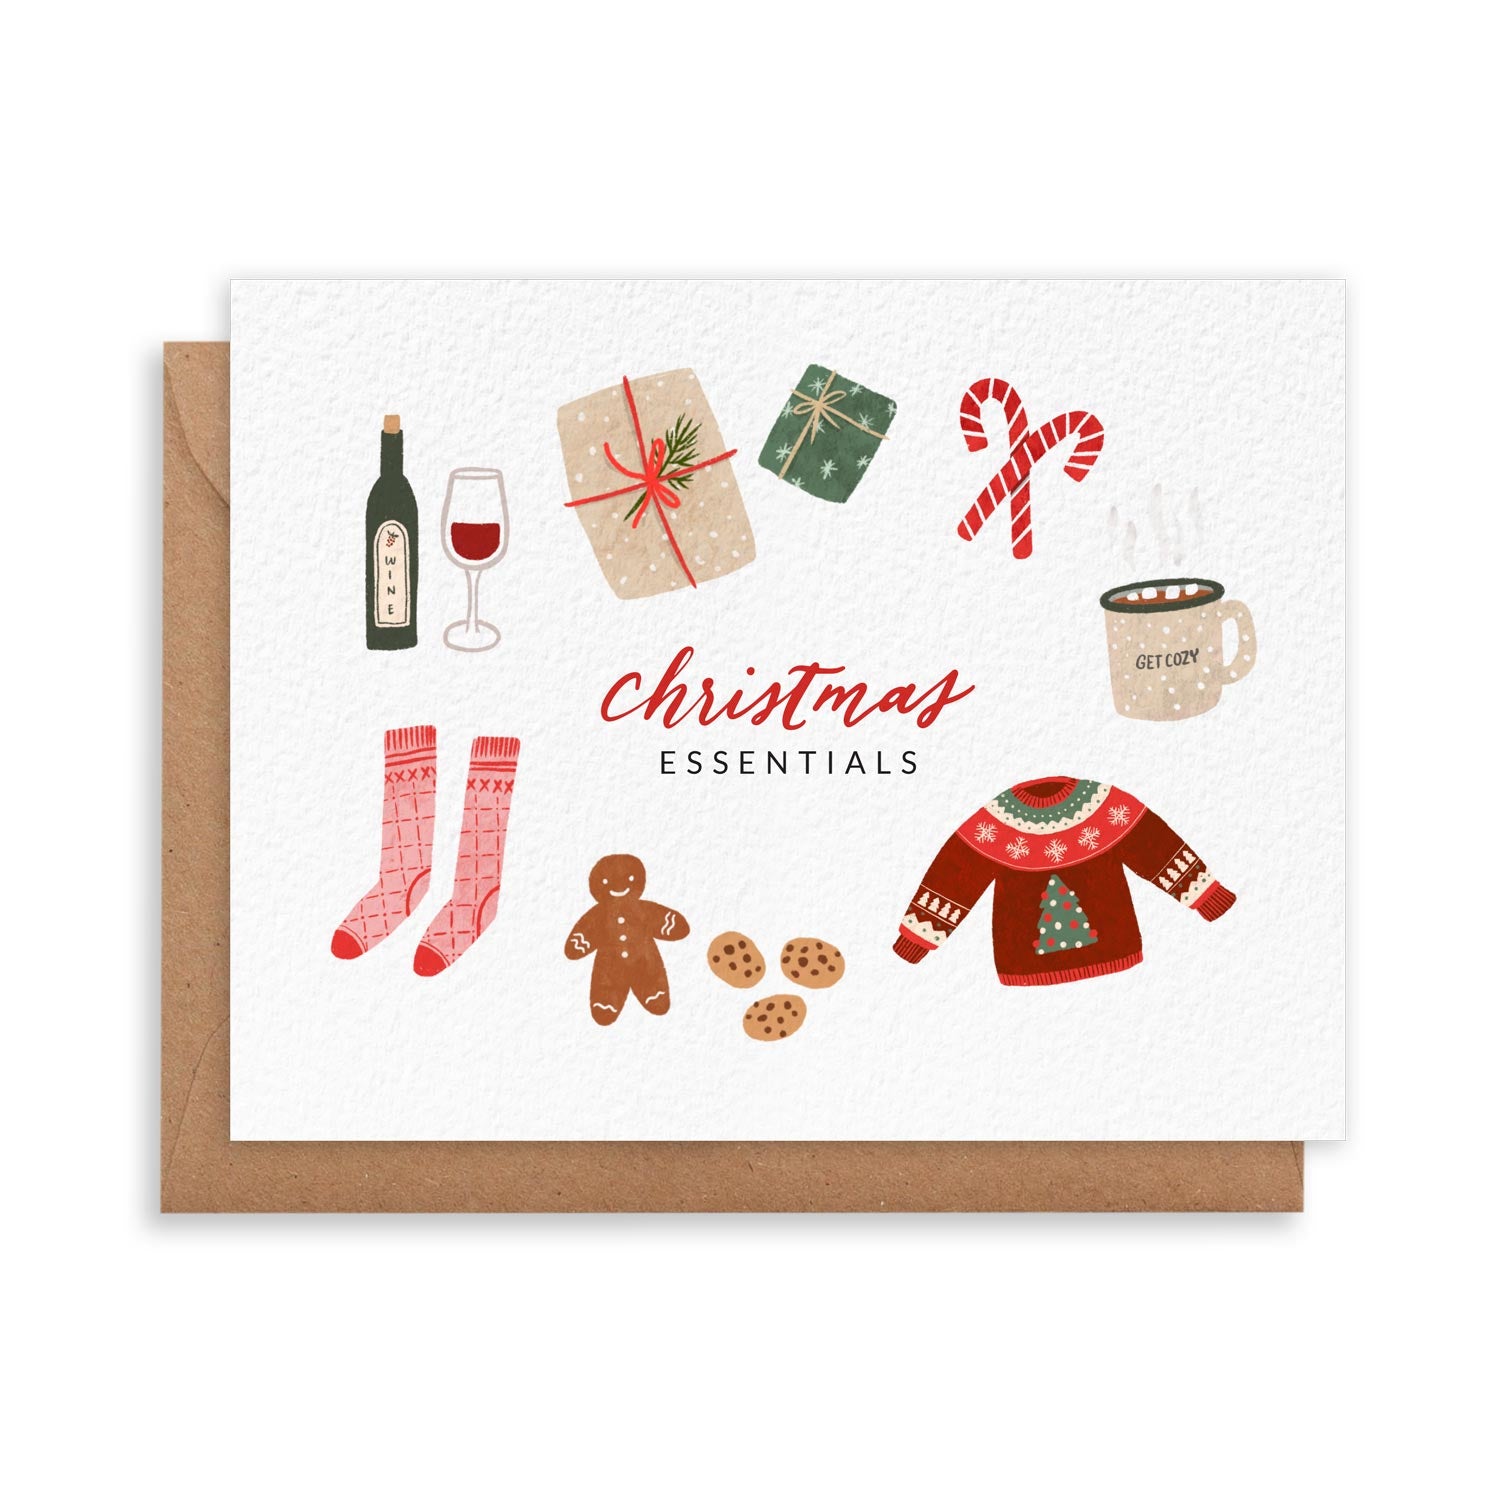 All the essential things for Christmas in one little card - glass of wine, wrapped gifts, candy cane, hot cocoa, cozy socks, cookies, and an ugly festive sweater